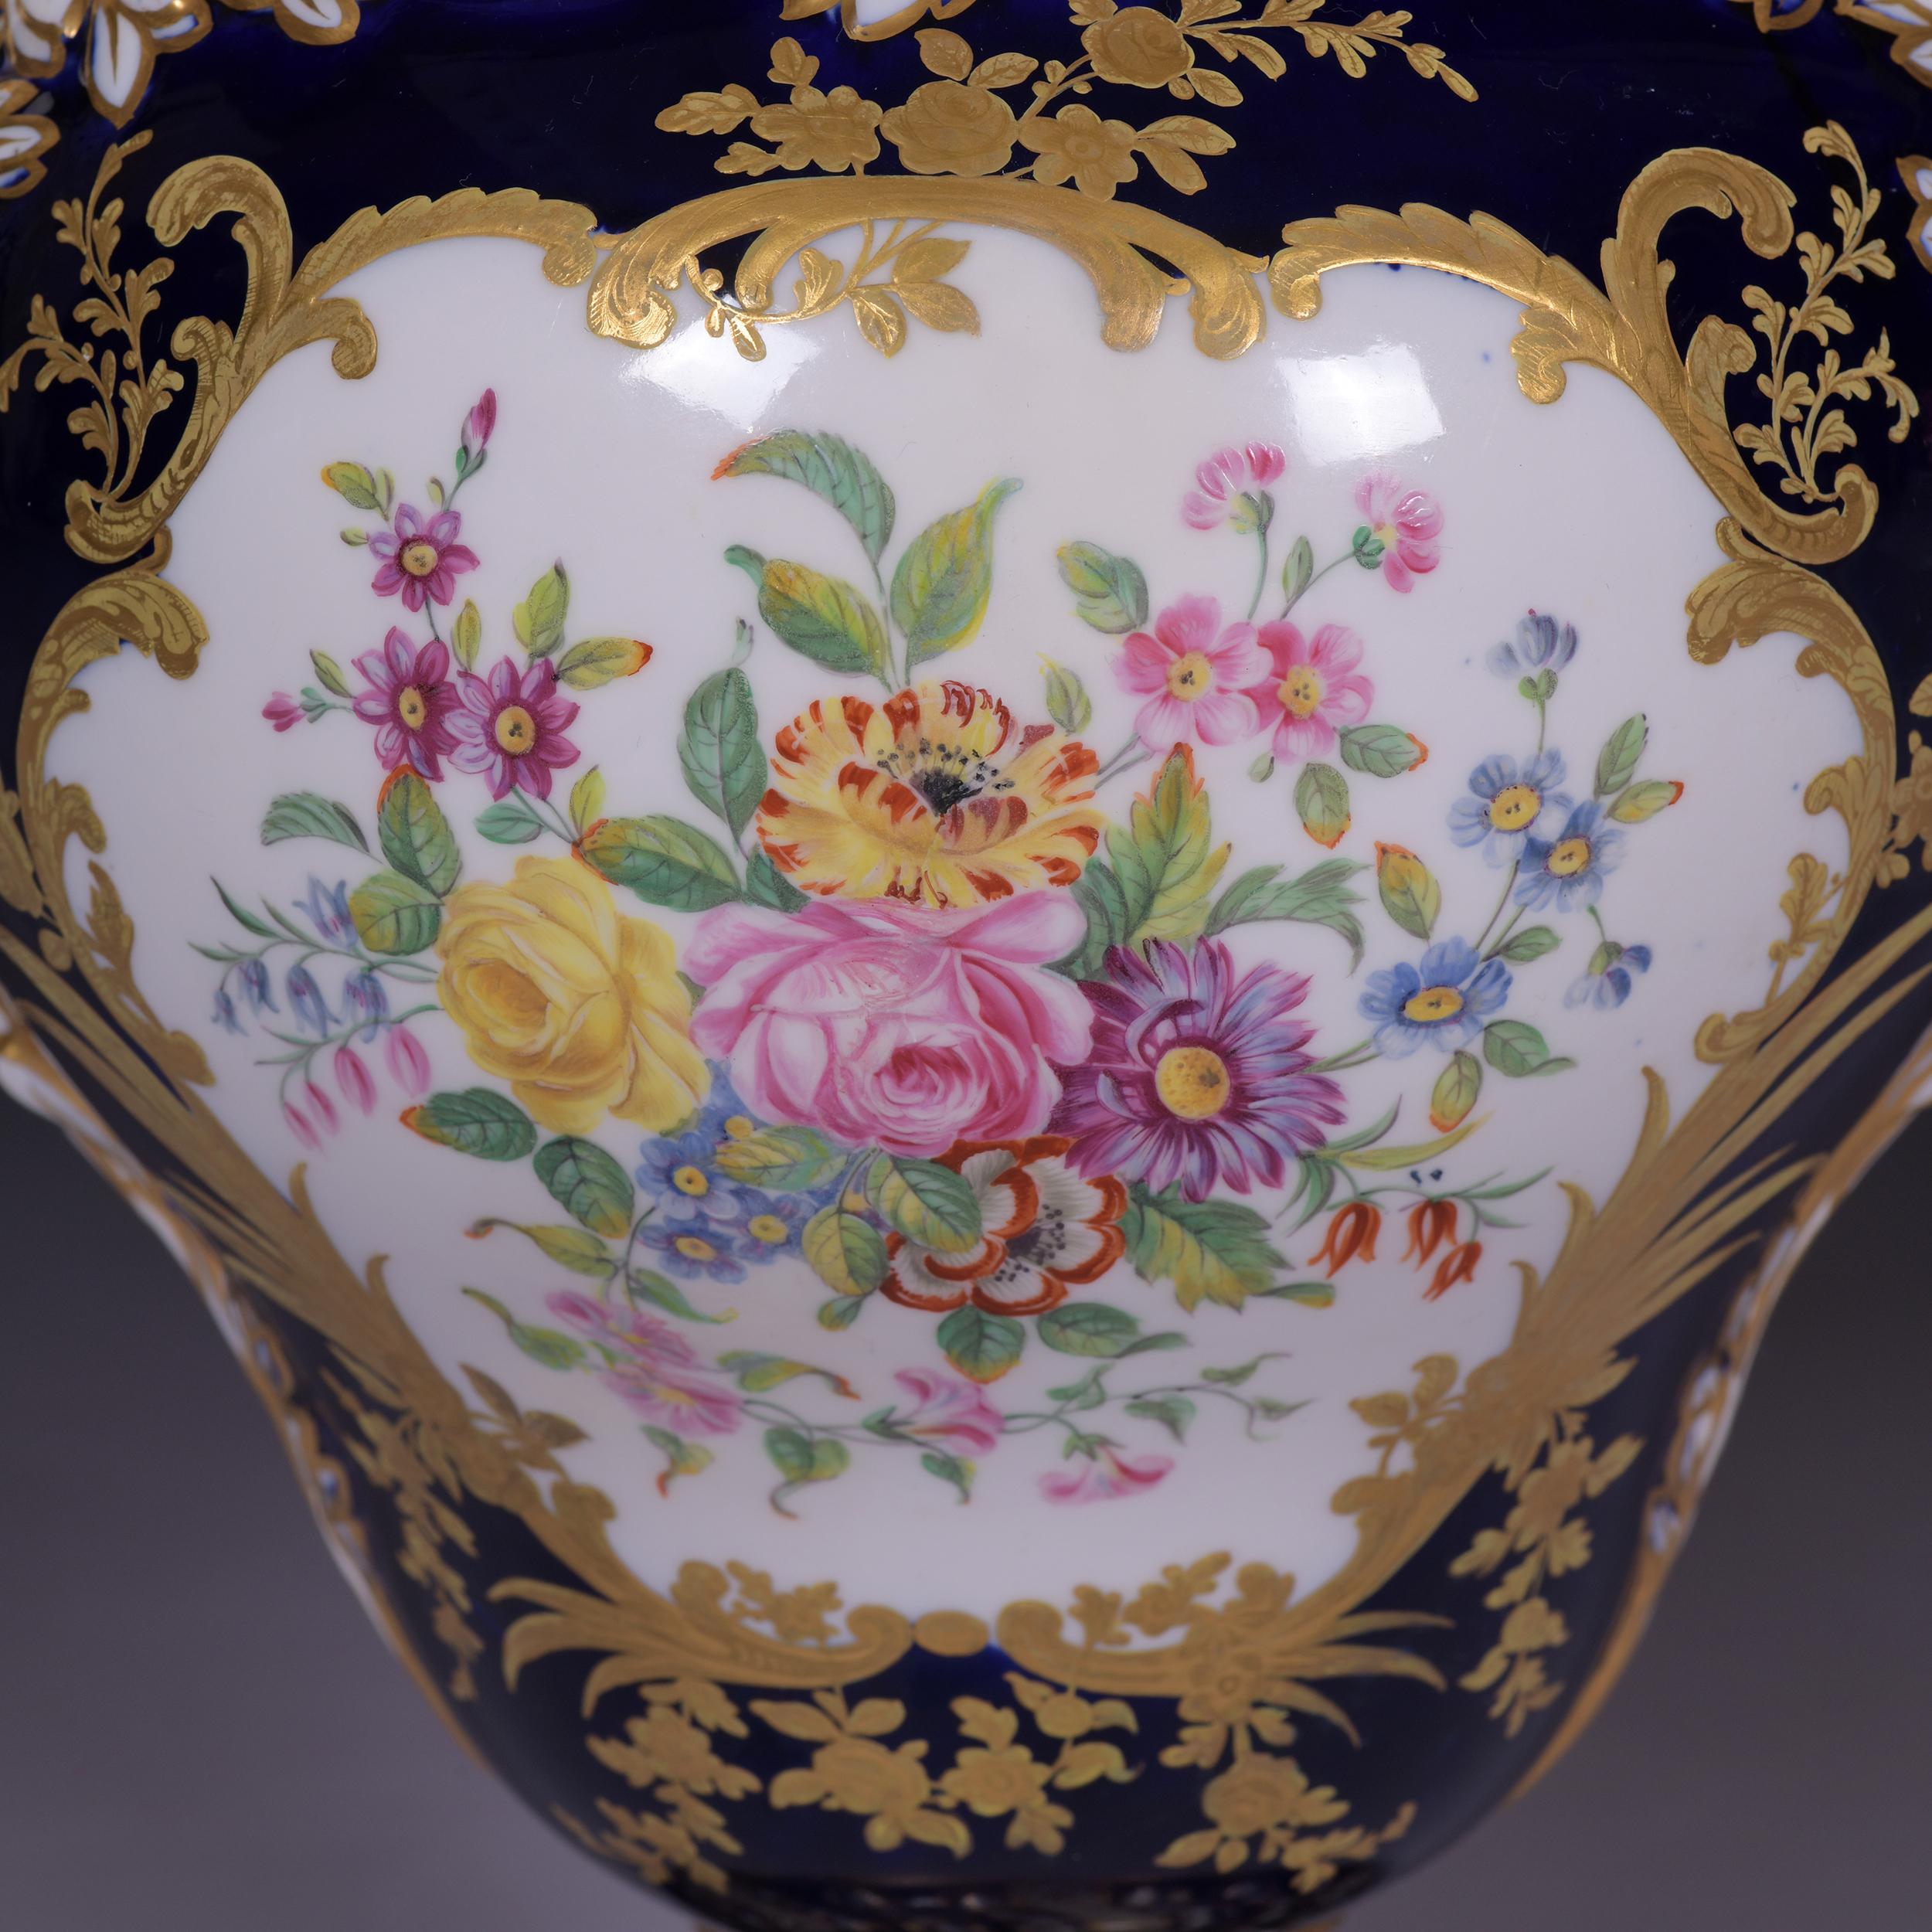 19th Century English Exhibition Porcelain Vase by Minton Painted by Martin Sneed For Sale 2